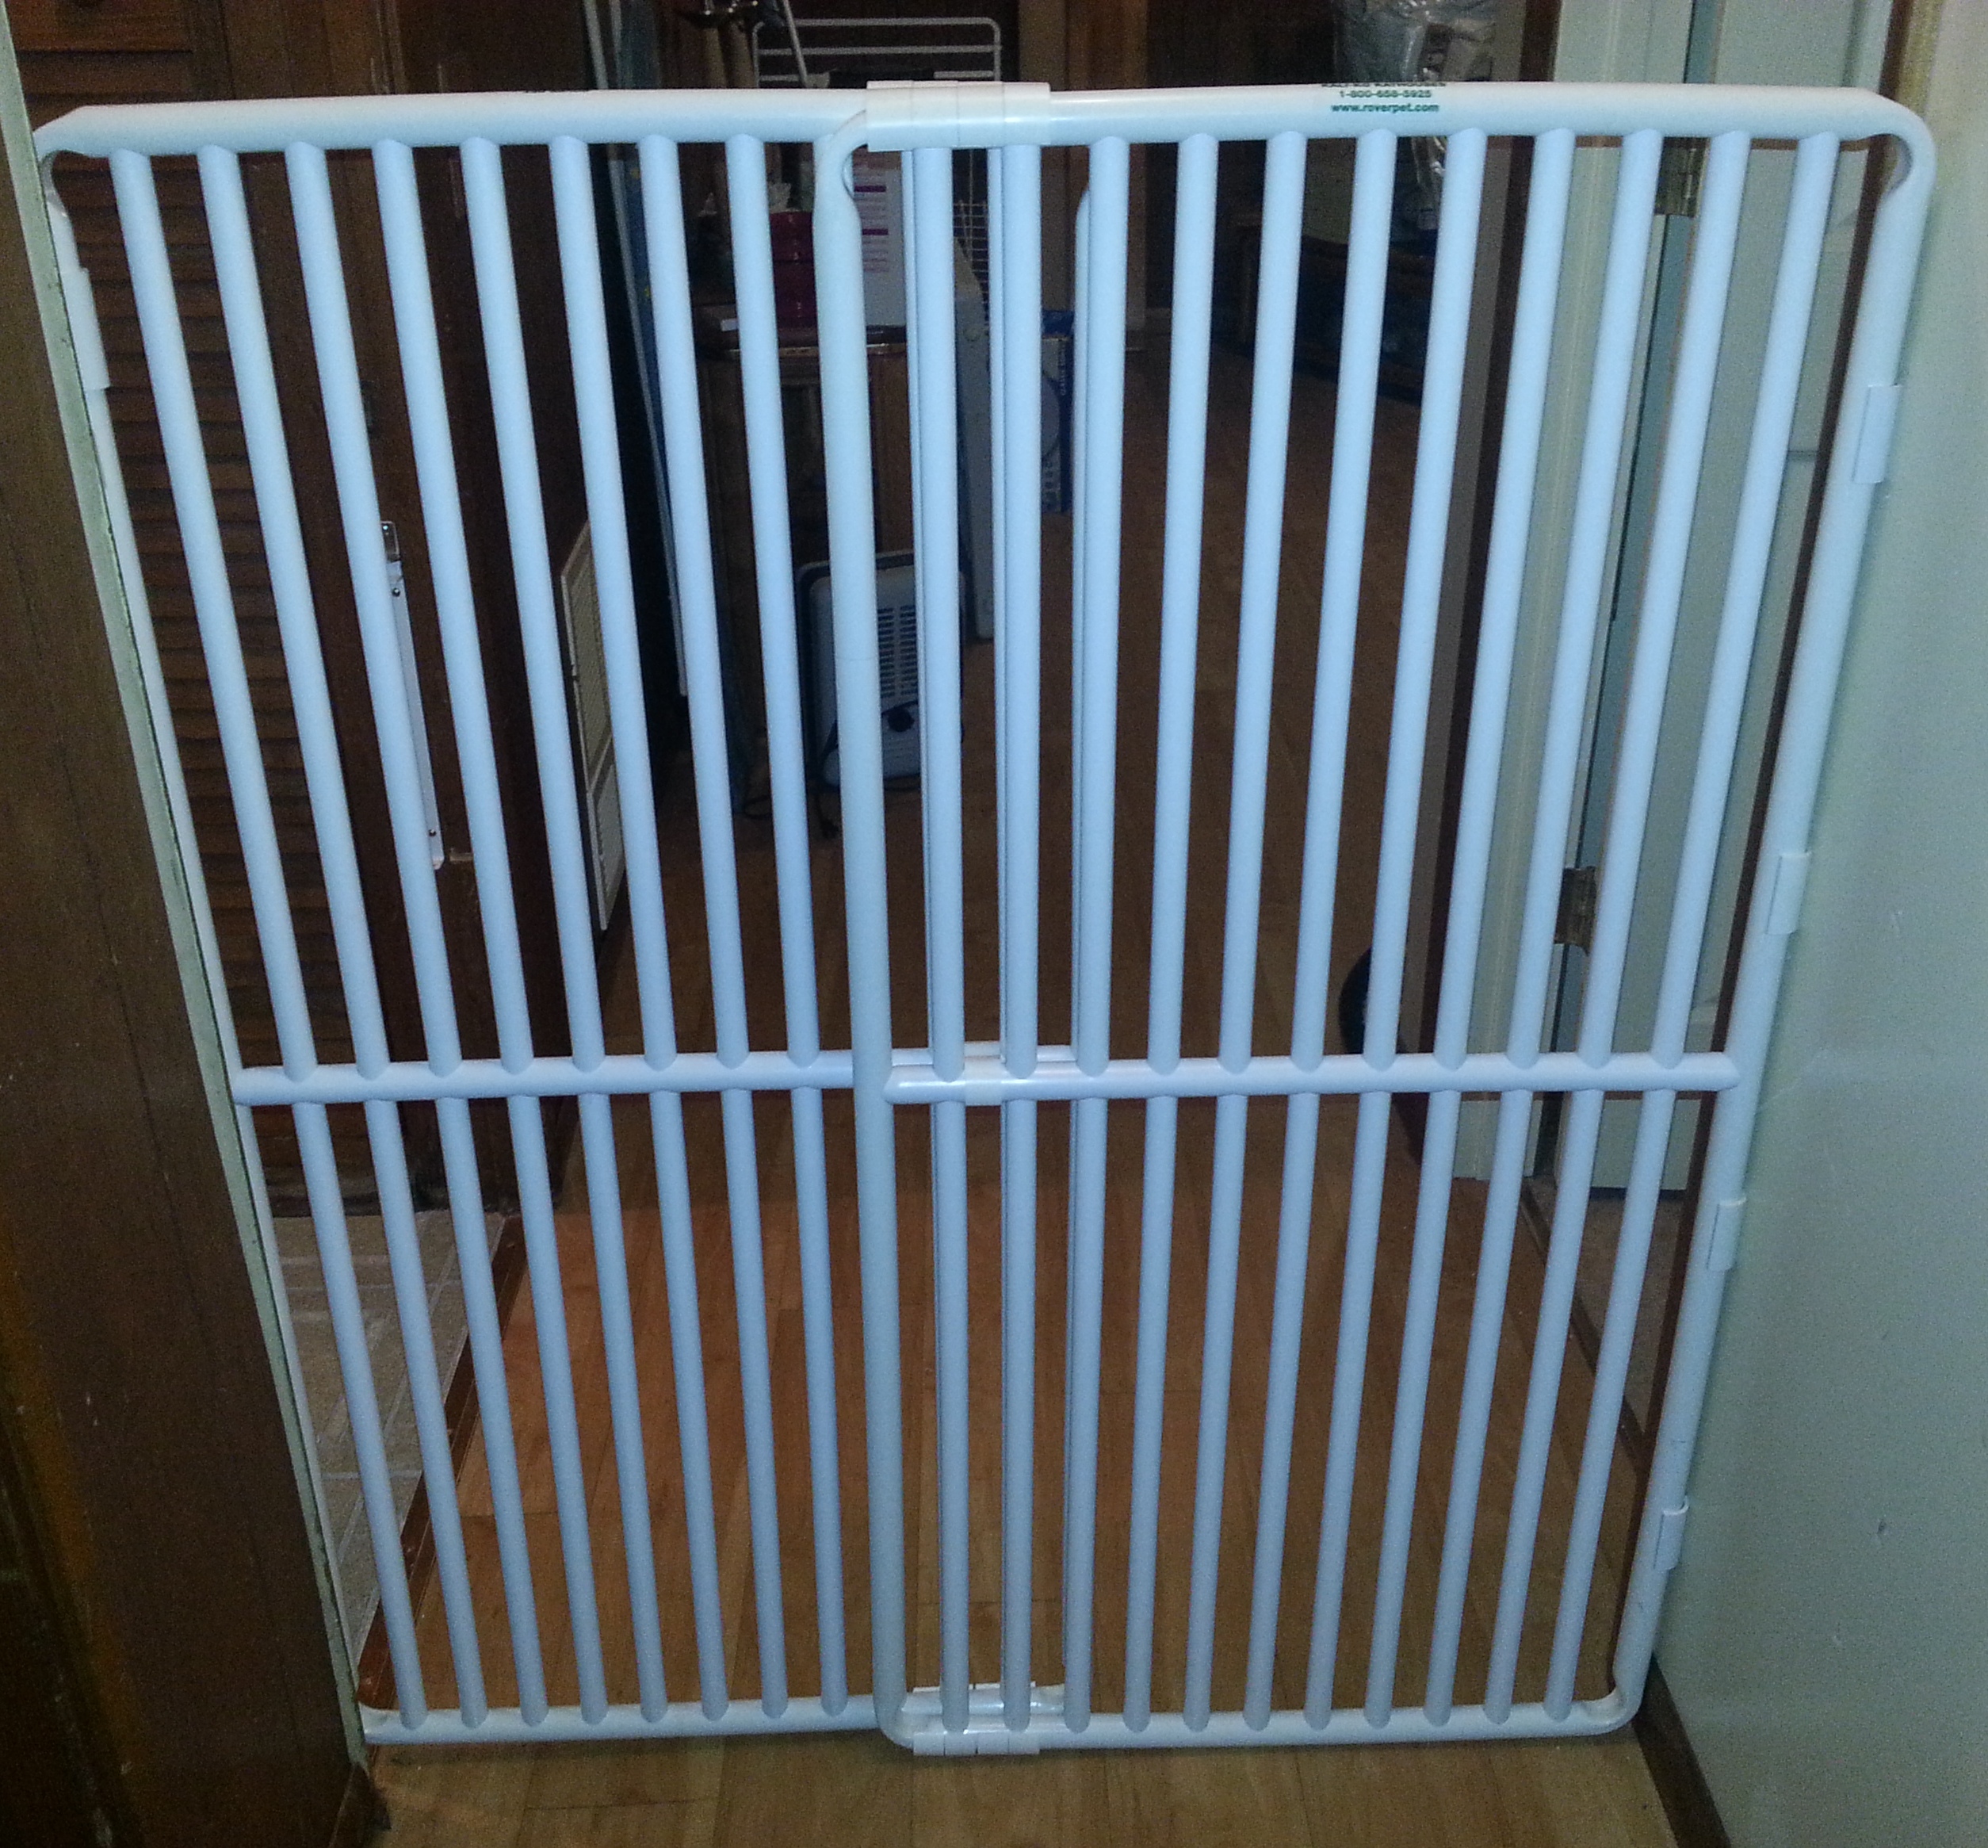 6 foot tall baby gate